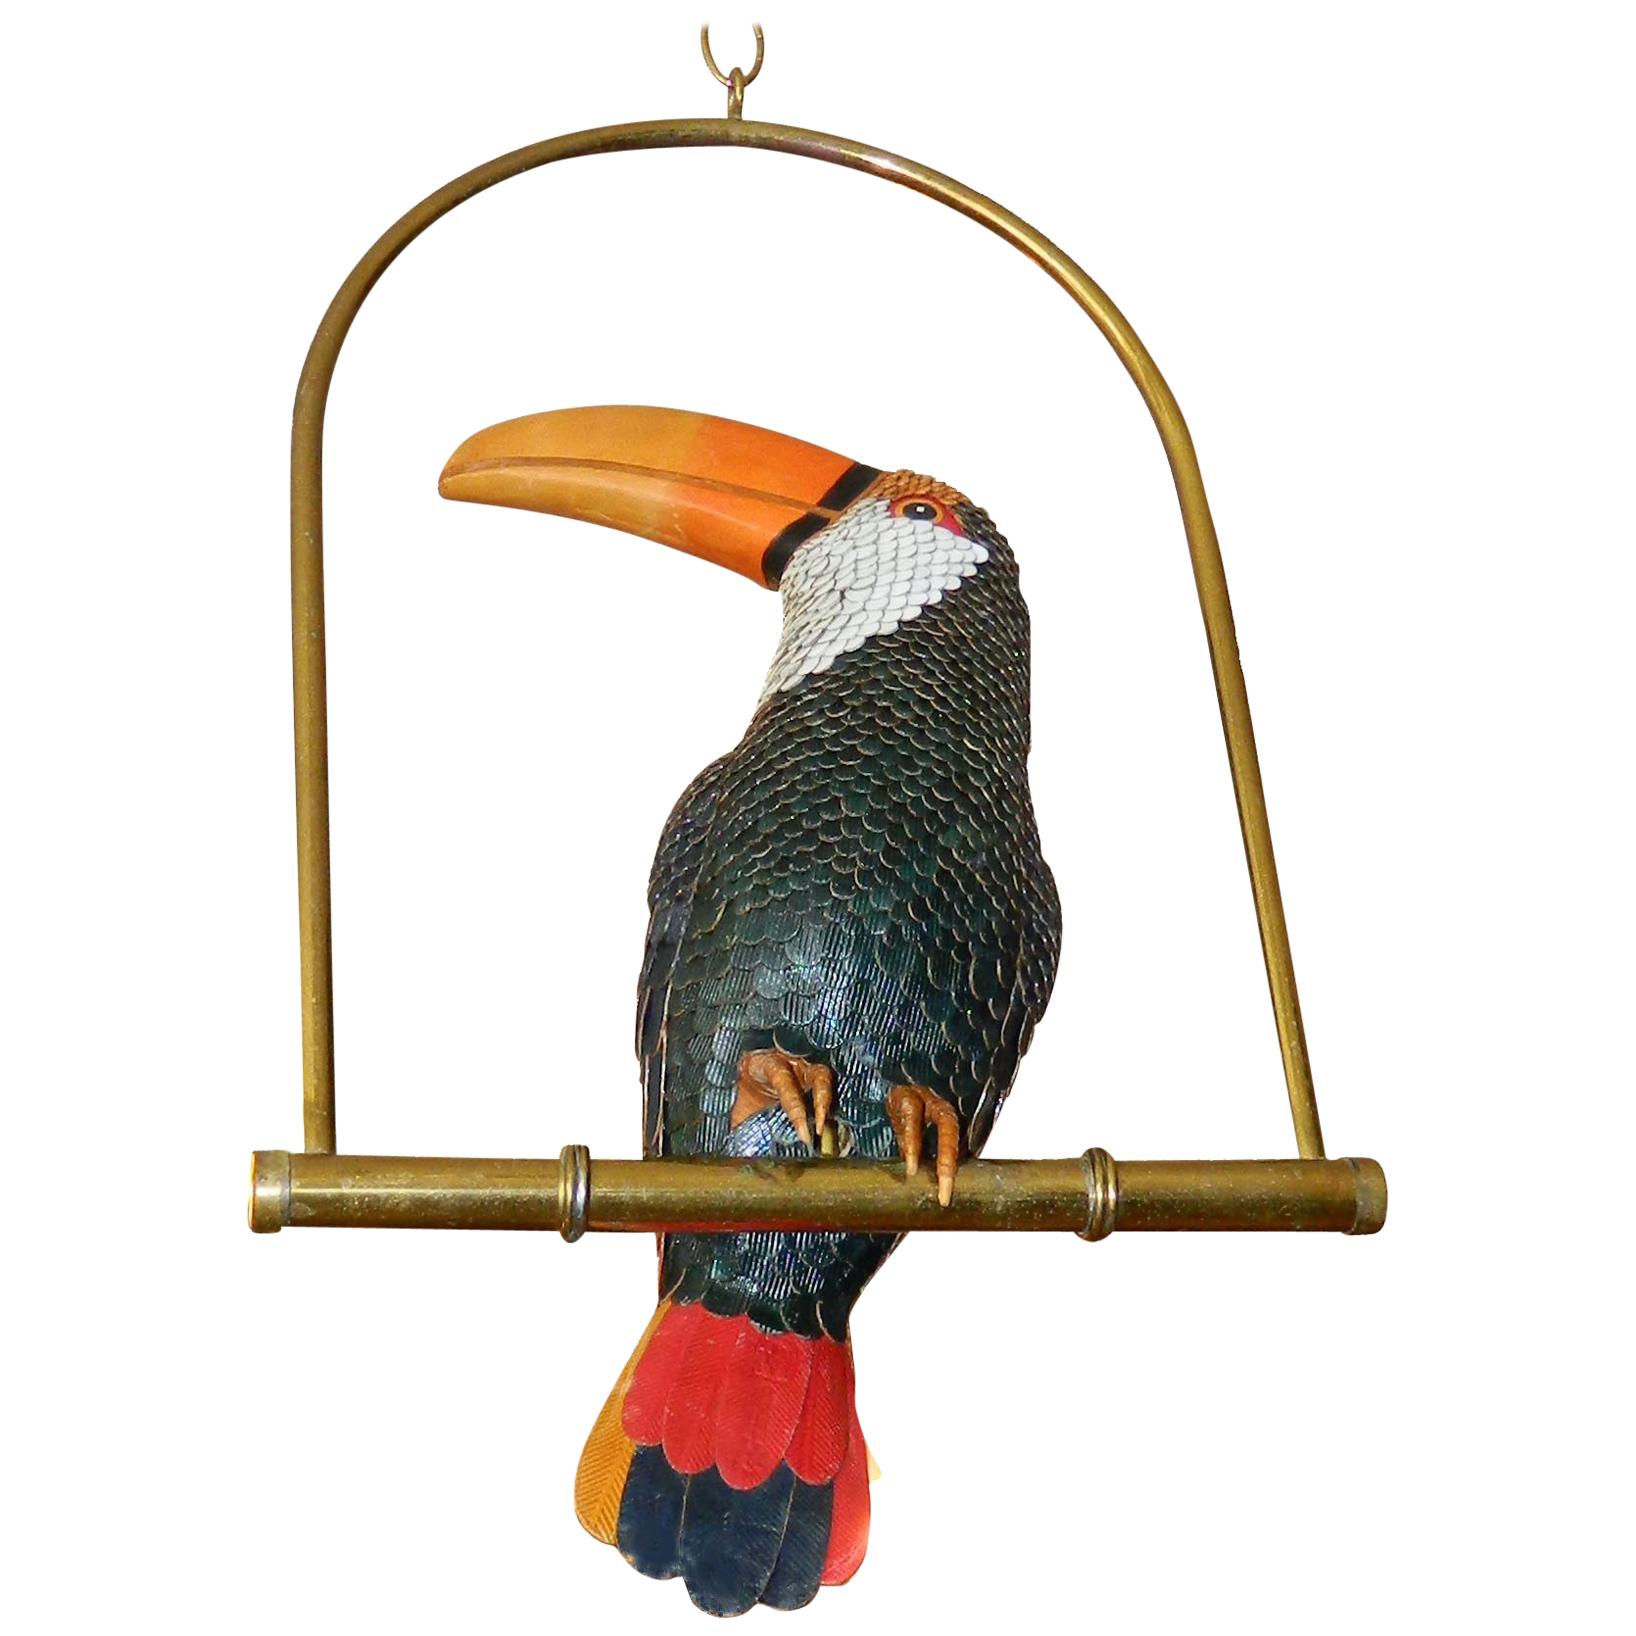 Signed FEDERICO Leather Toucan